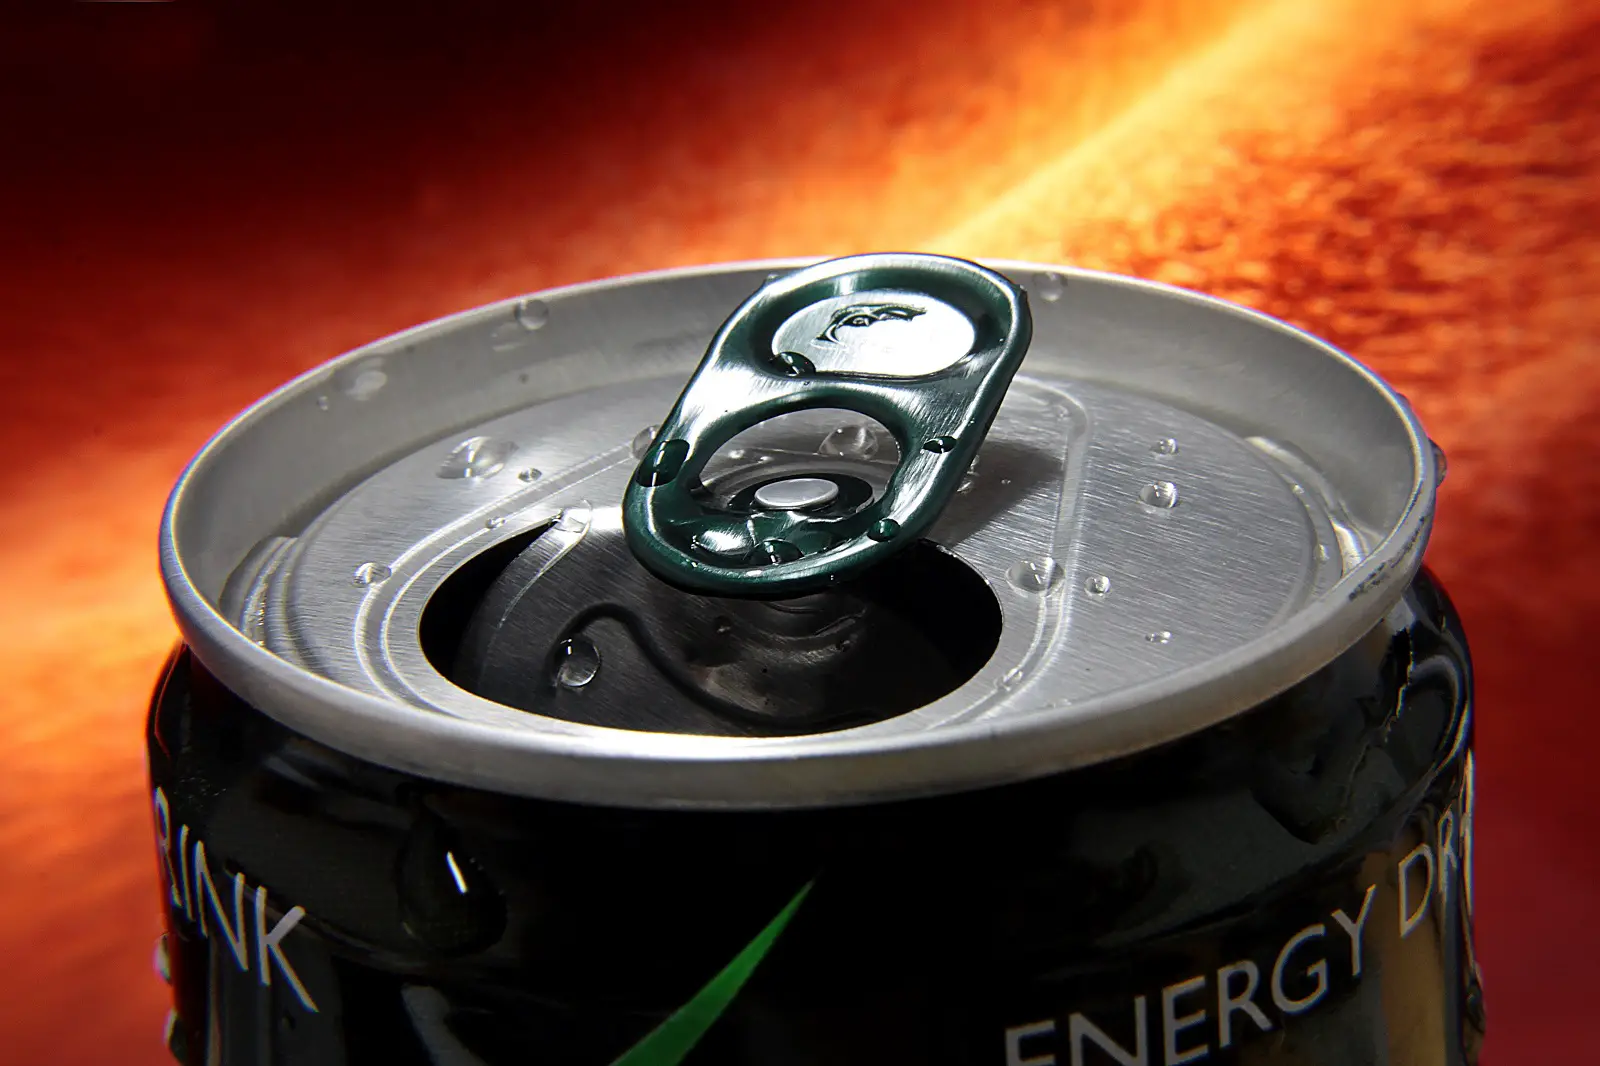 An in-depth review of the best energy drinks available in 2019.